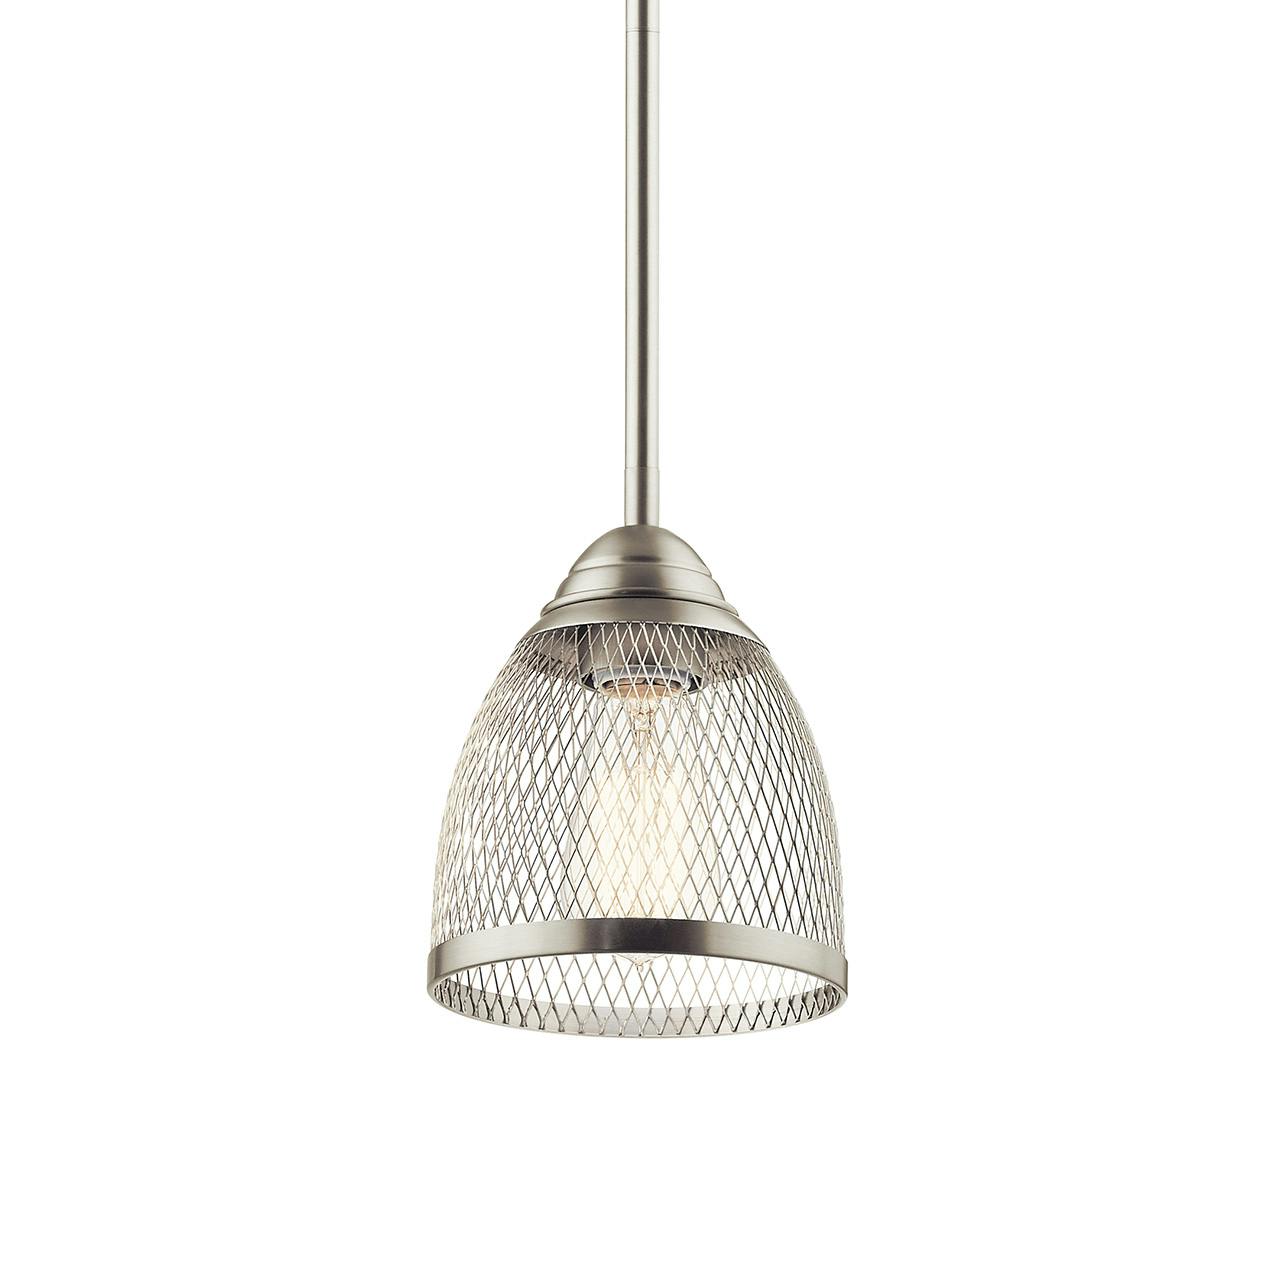 Voclain 1 Light Mini Pendant in Nickel without the canopy on a white background